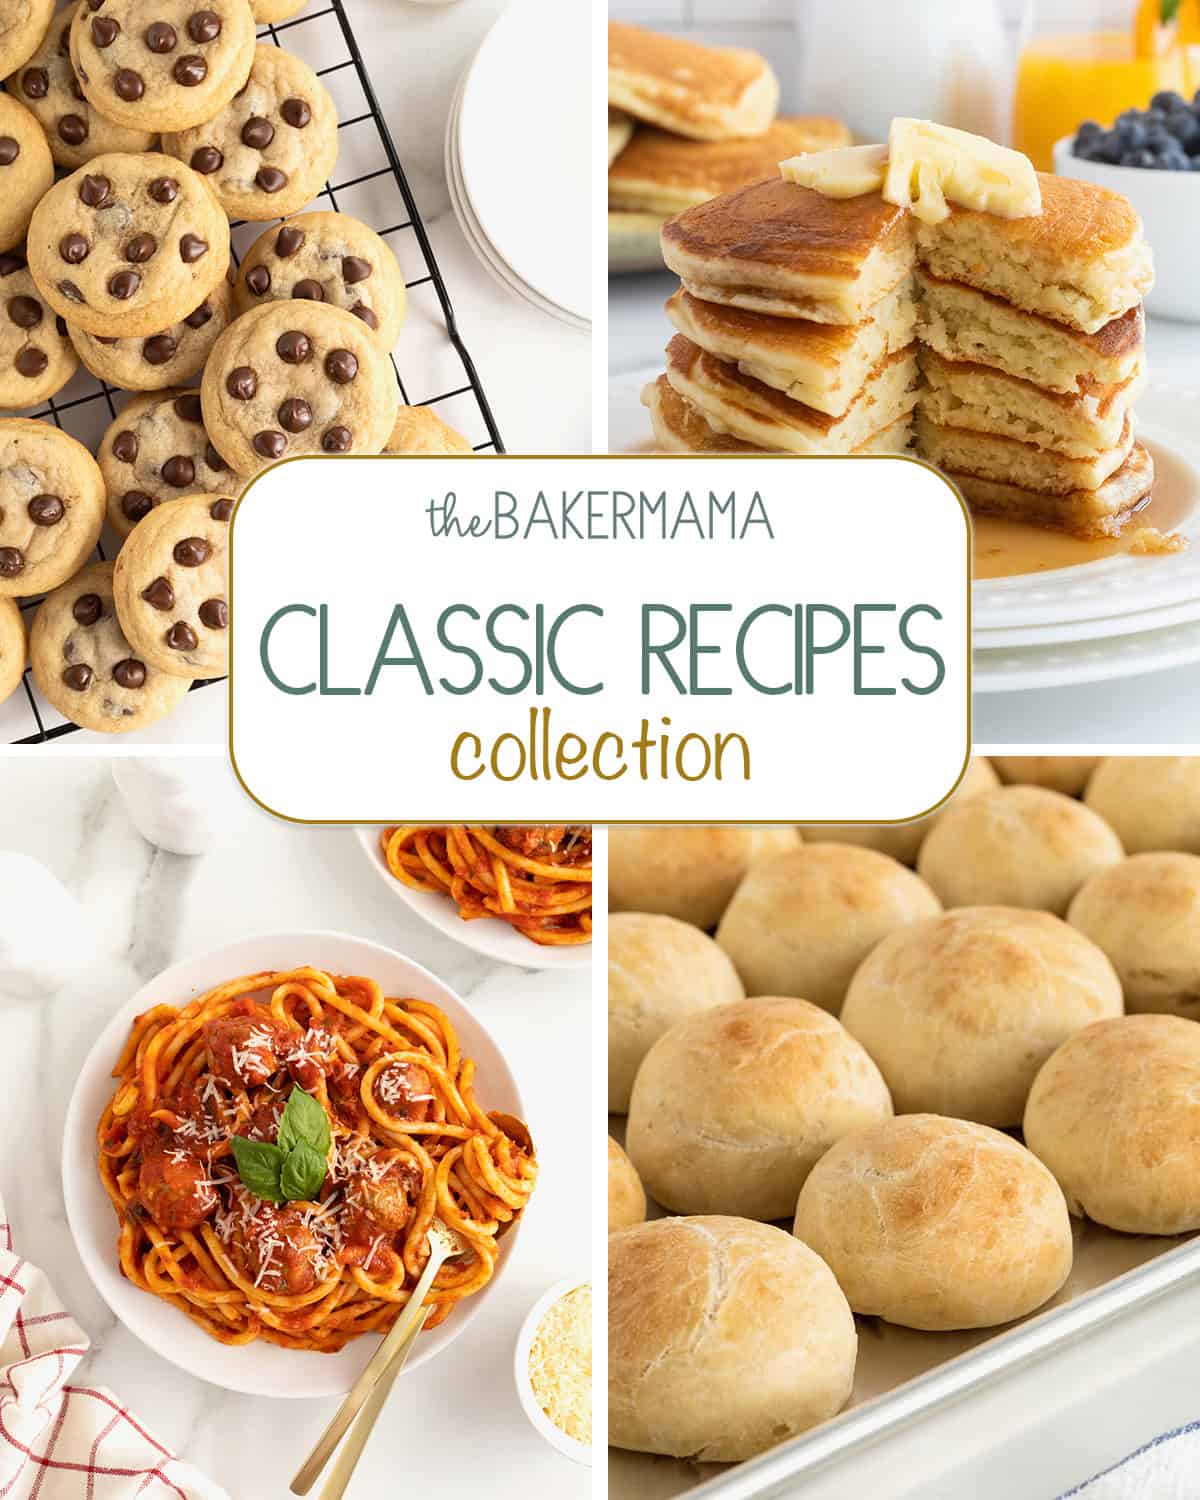 Classic chocolate chip cookies, classic buttermilk pancakes, classic spaghetti and meatballs, classic dinner rolls.